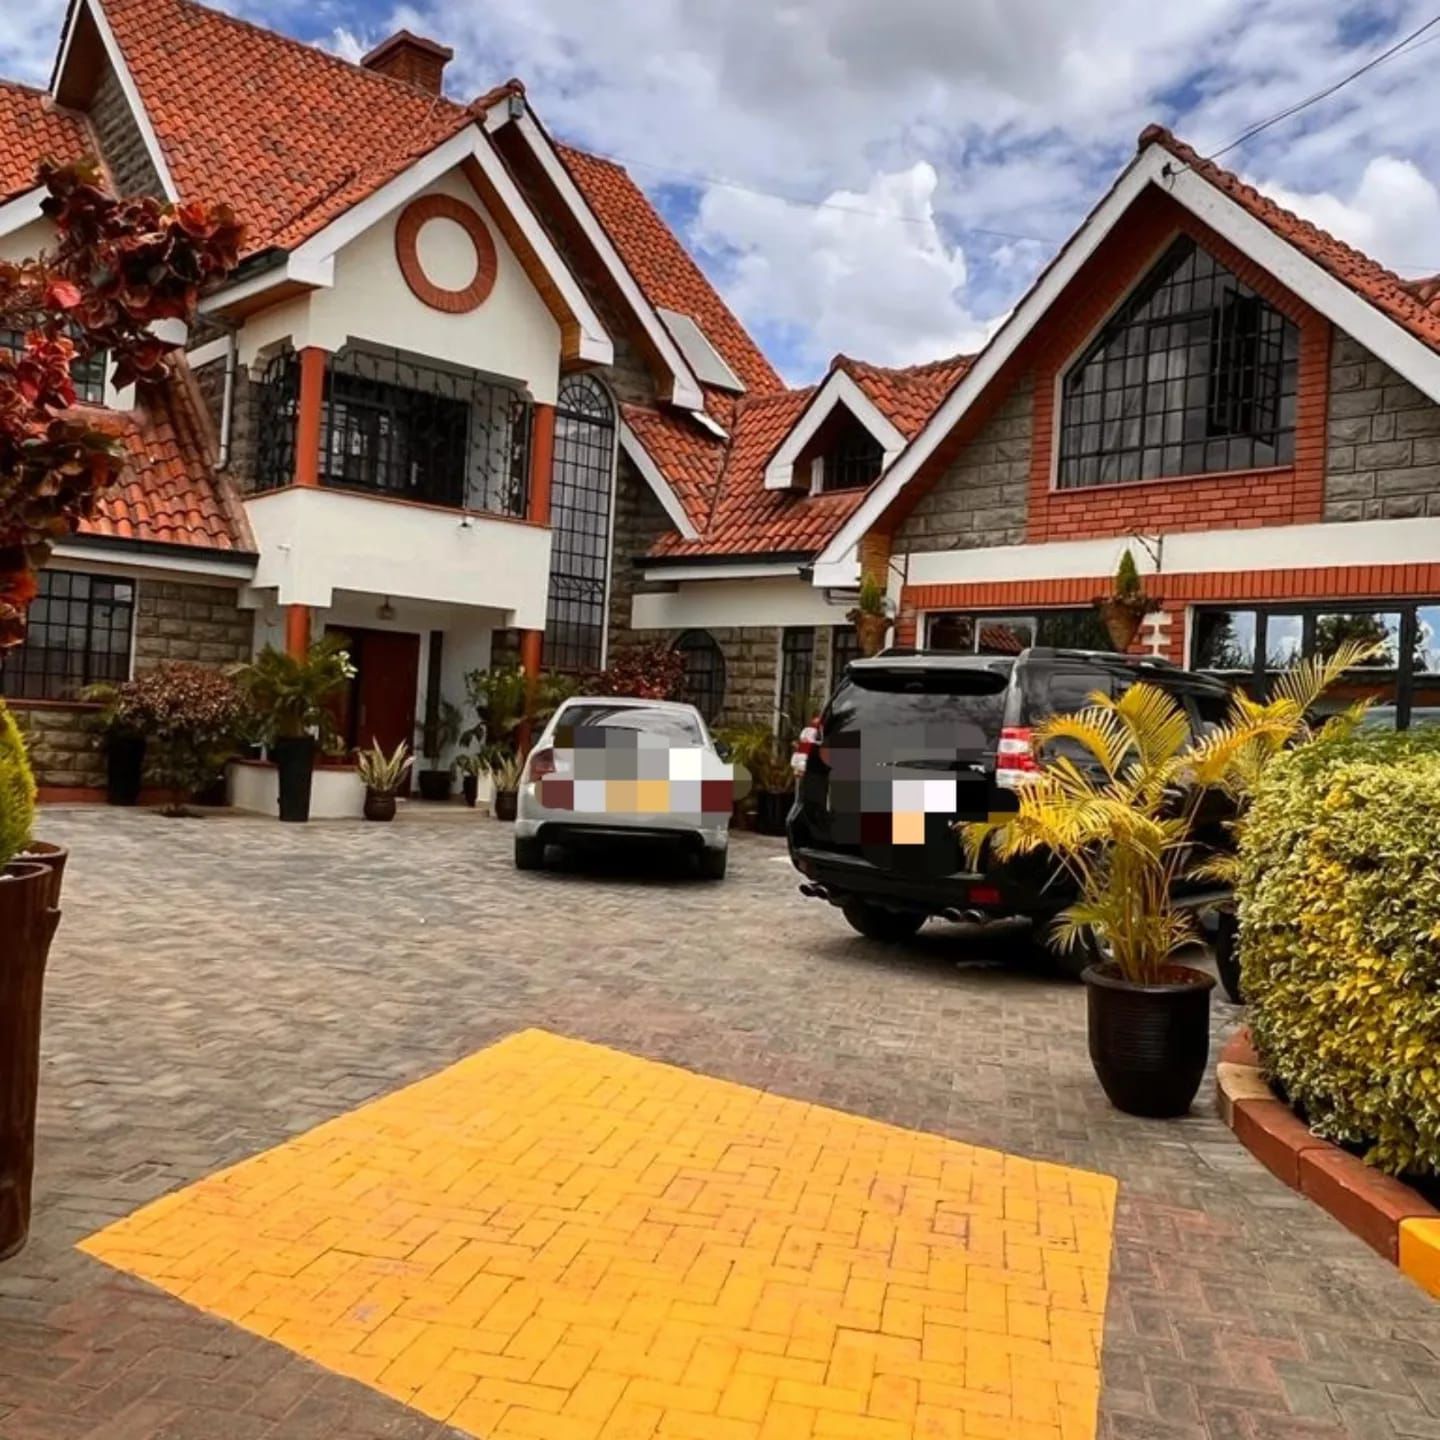 Spacious 6 Bedroom Townhouse For Sale. With a Spacious lounge area, Waiting room, office, and Dsq( 2 rooms). Asking Price. 28 M. Musilli Homes.